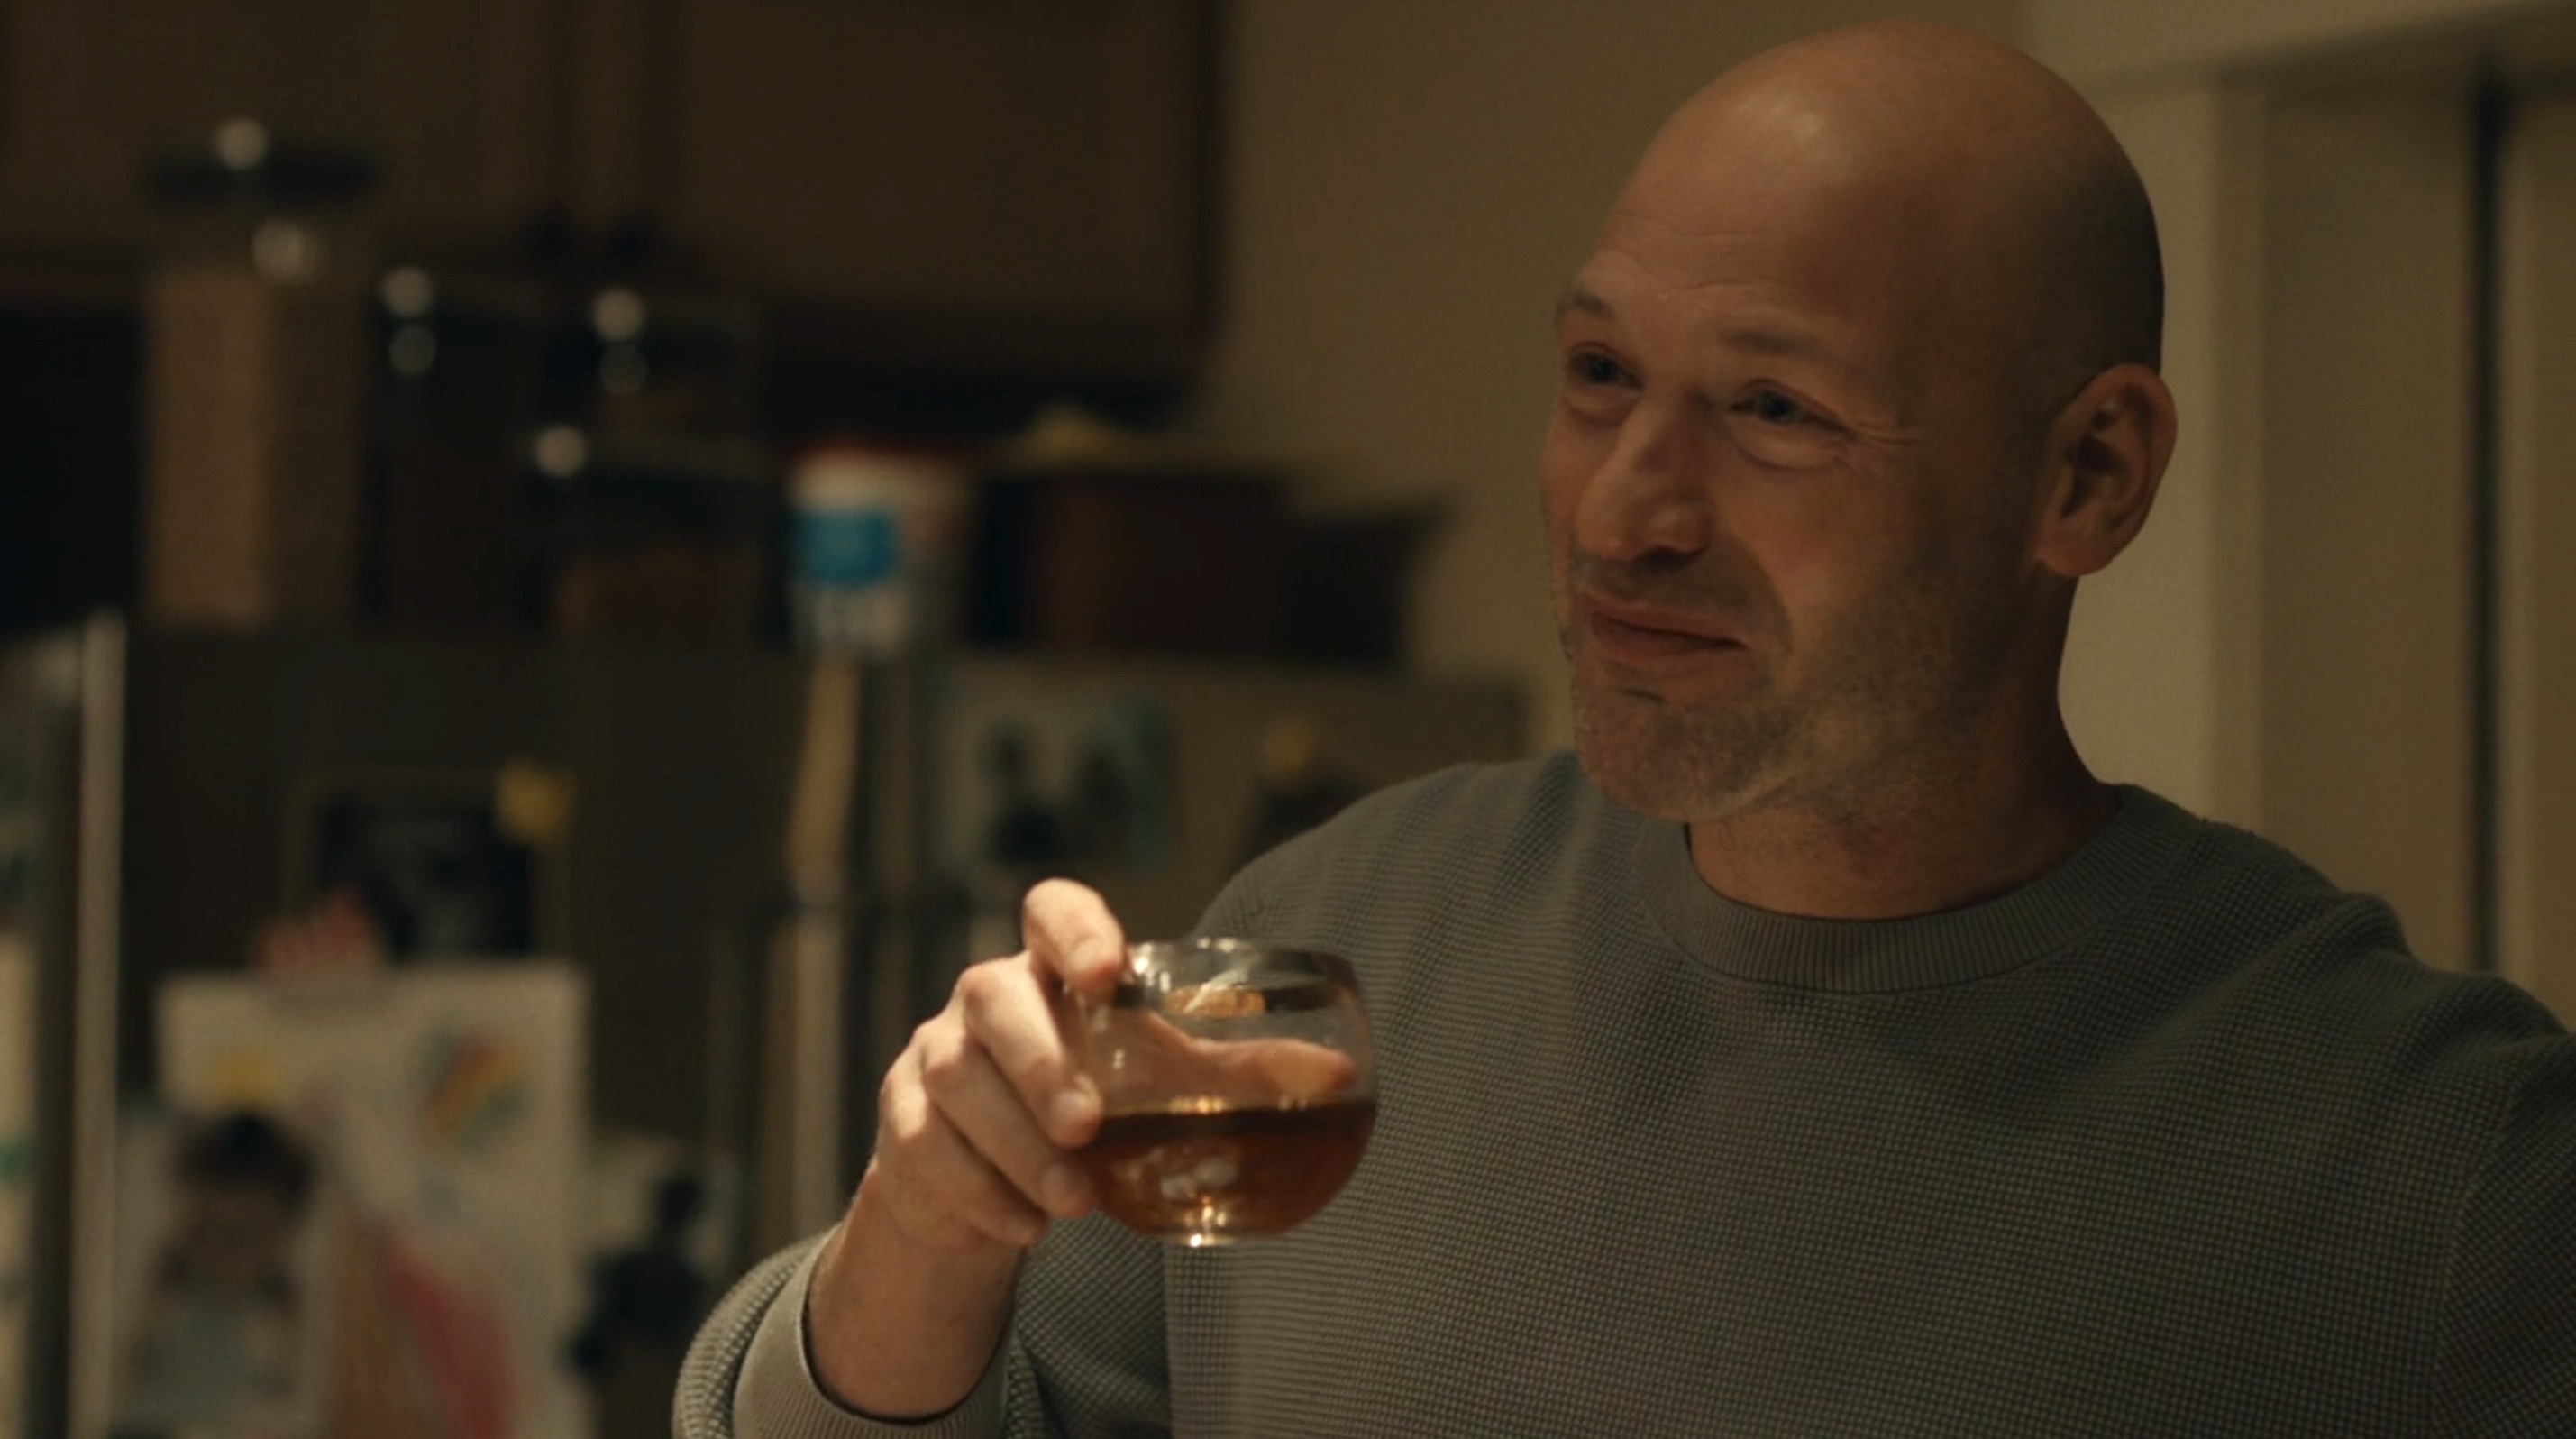 Scenes from a Marriage Cast on HBO - Corey Stoll as Peter